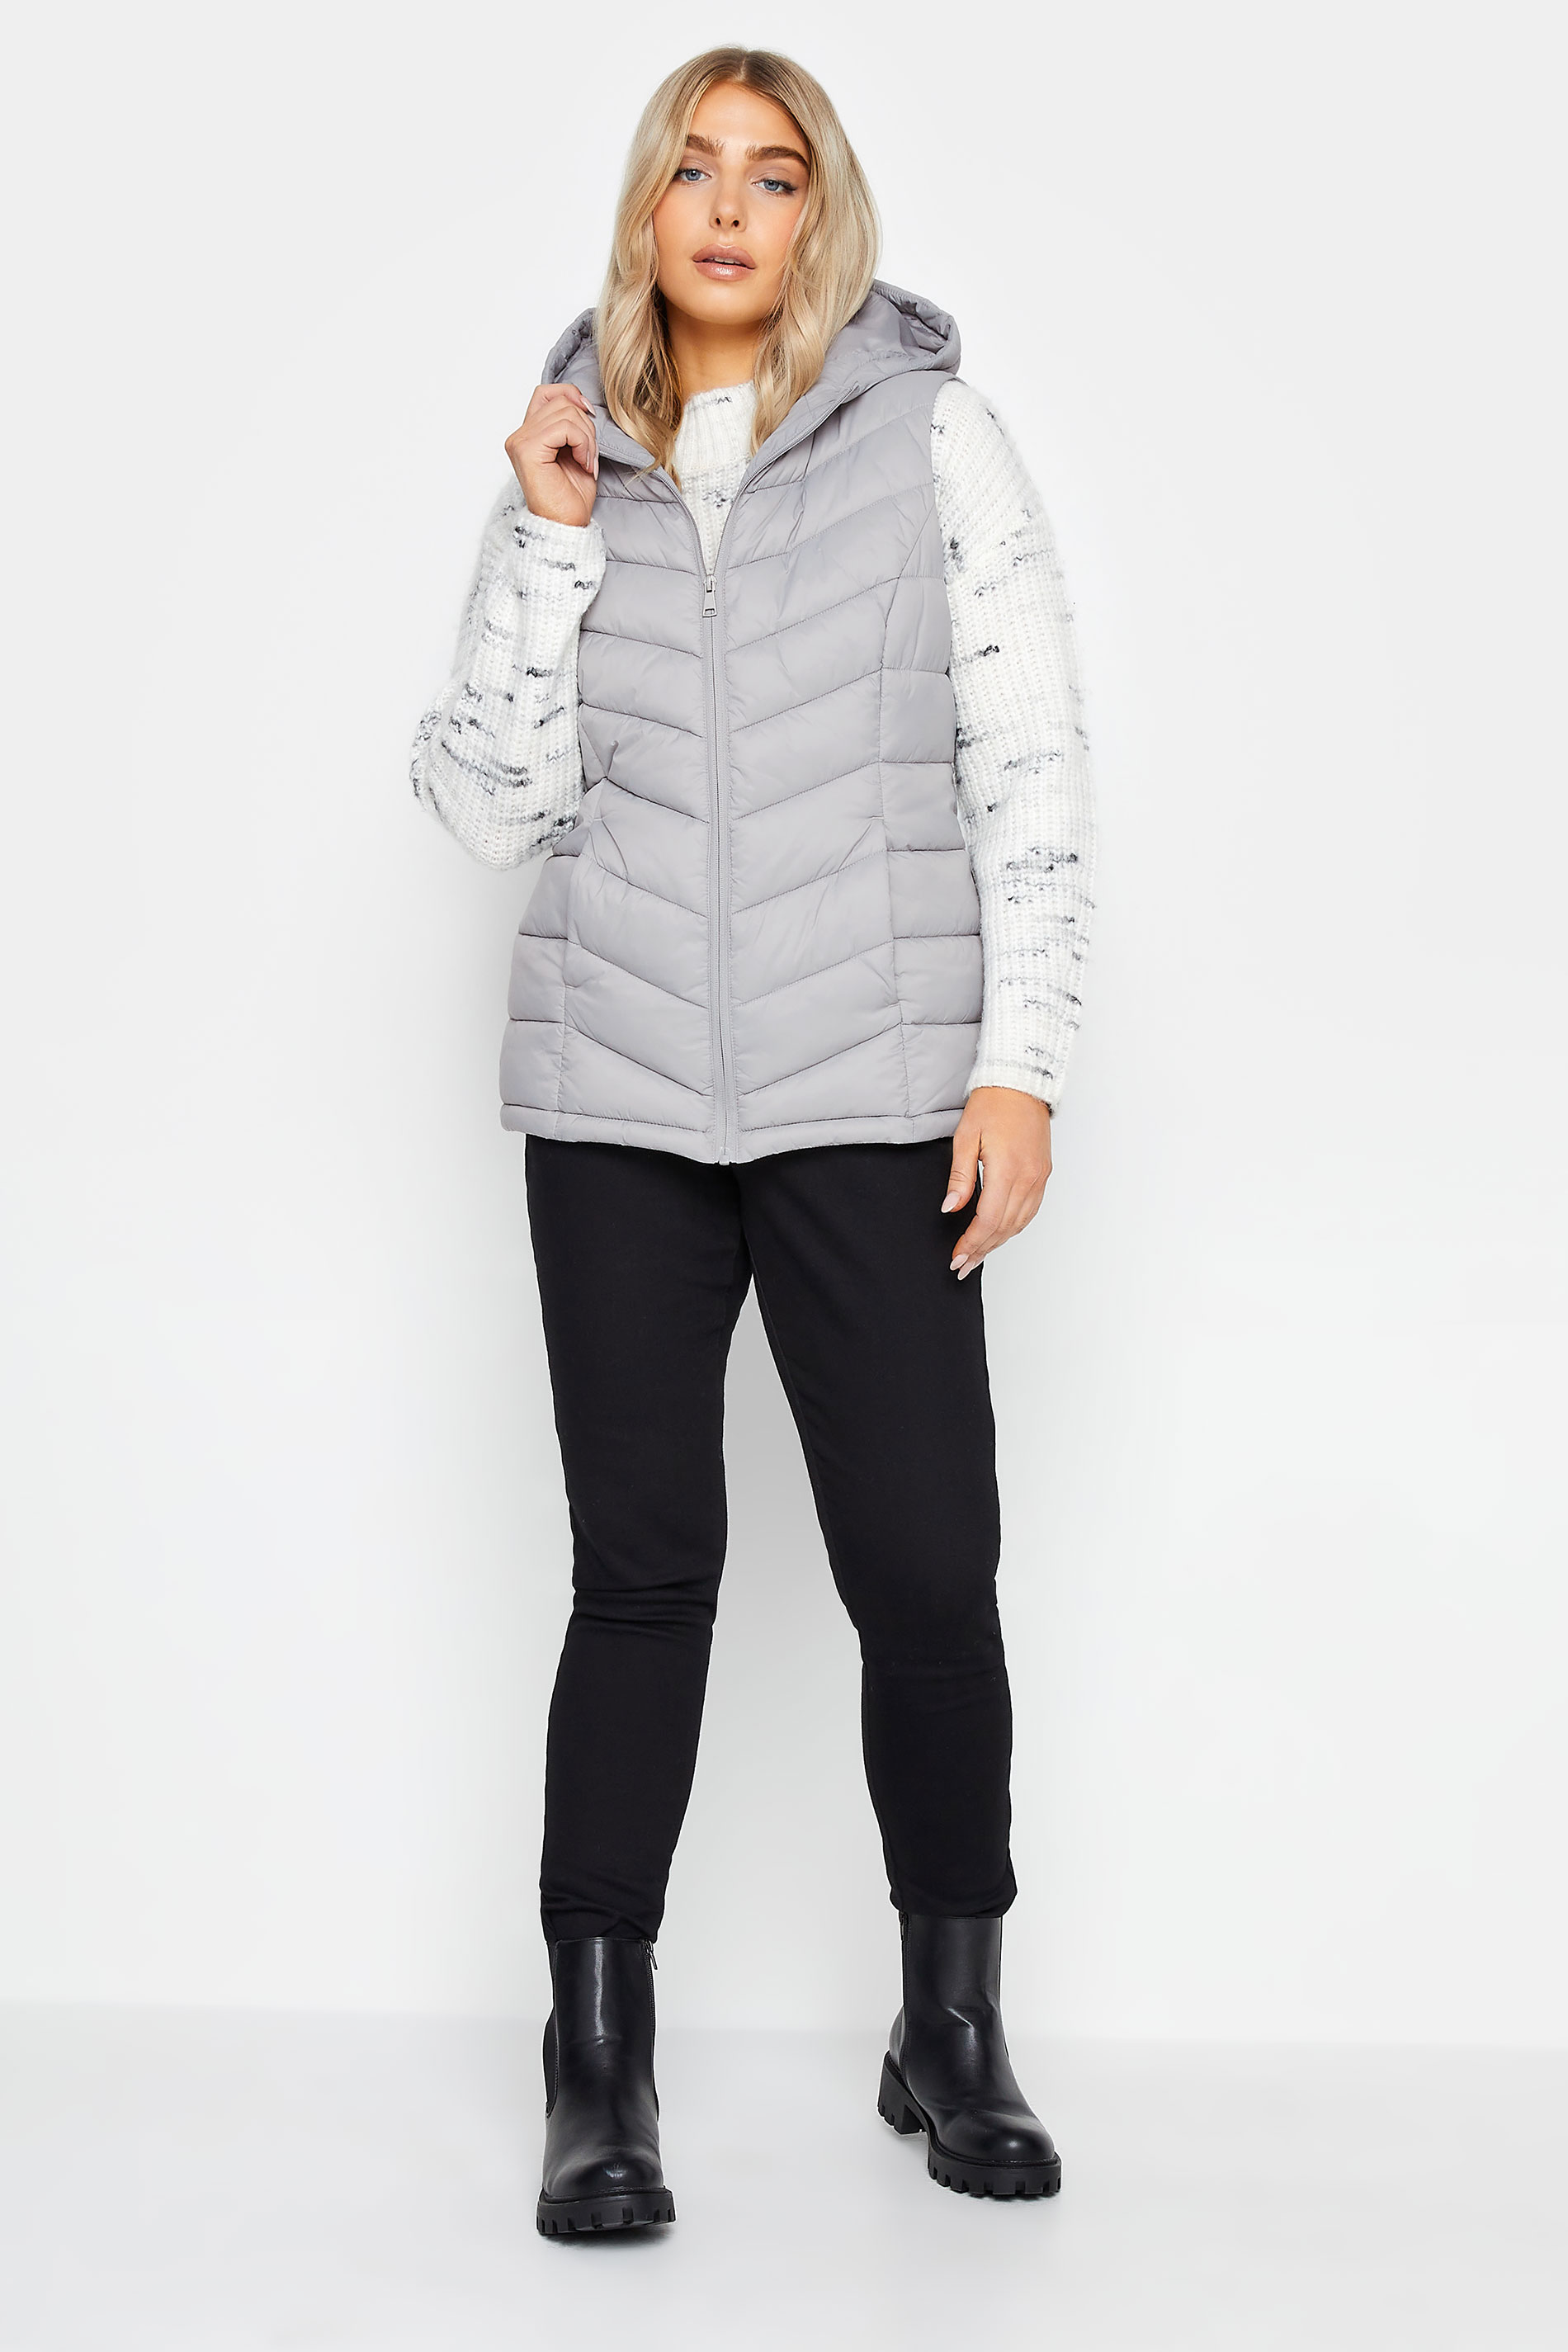 M&Co Grey Quilted Gilet | M&Co 2